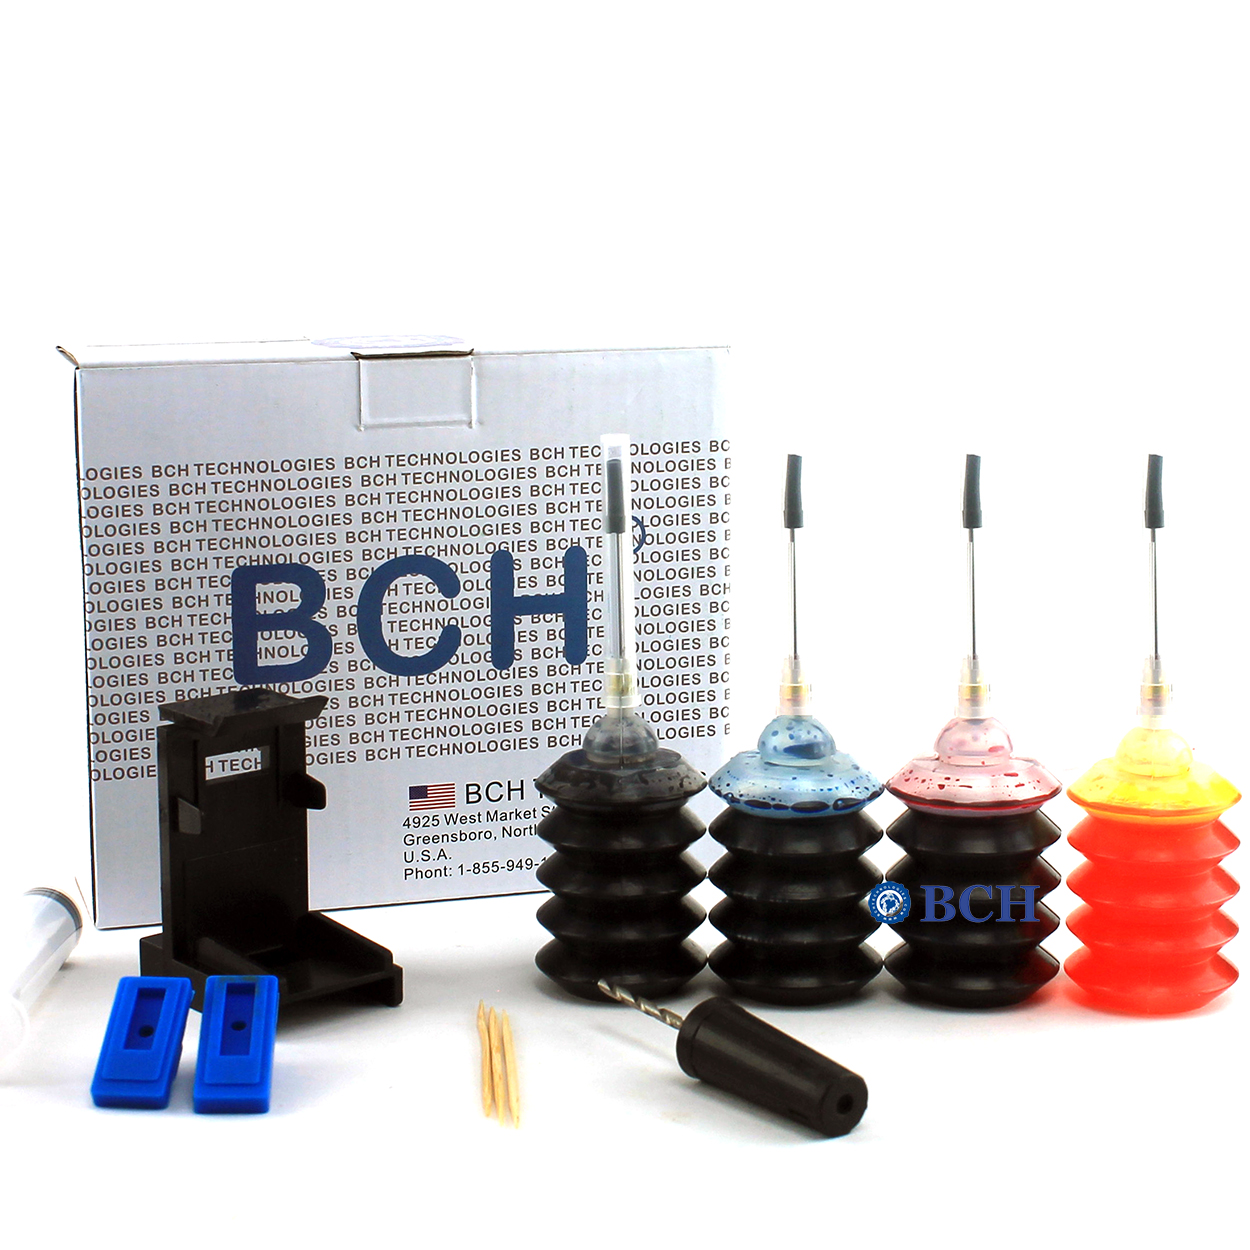 BCH First-Timer Printer Ink Refill Kit for 21, 56, 60, 61, 62, 65, 74, 75, 93, 95, 96, 97, 901 - 1 pack of EZ30-T - image 1 of 4